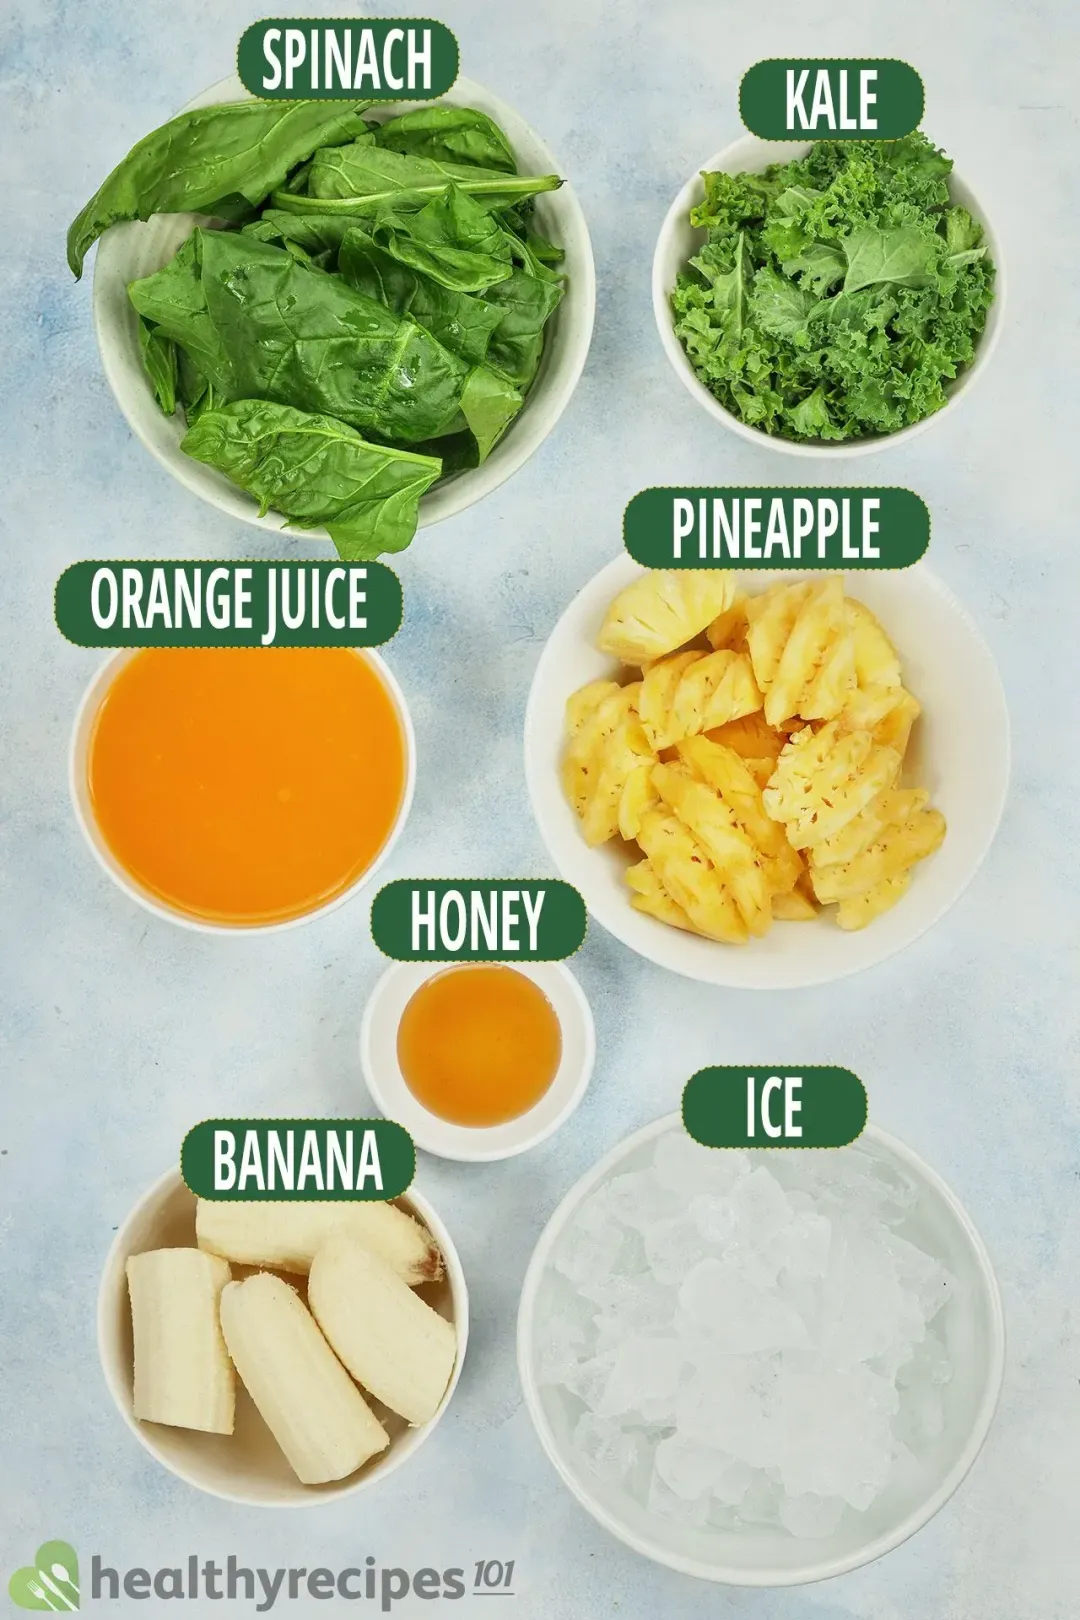 ingredients for this pineapple green smoothie: spinach leaves, kale leaves, orange juice, cubed pineapple, honey, bananas, and ice